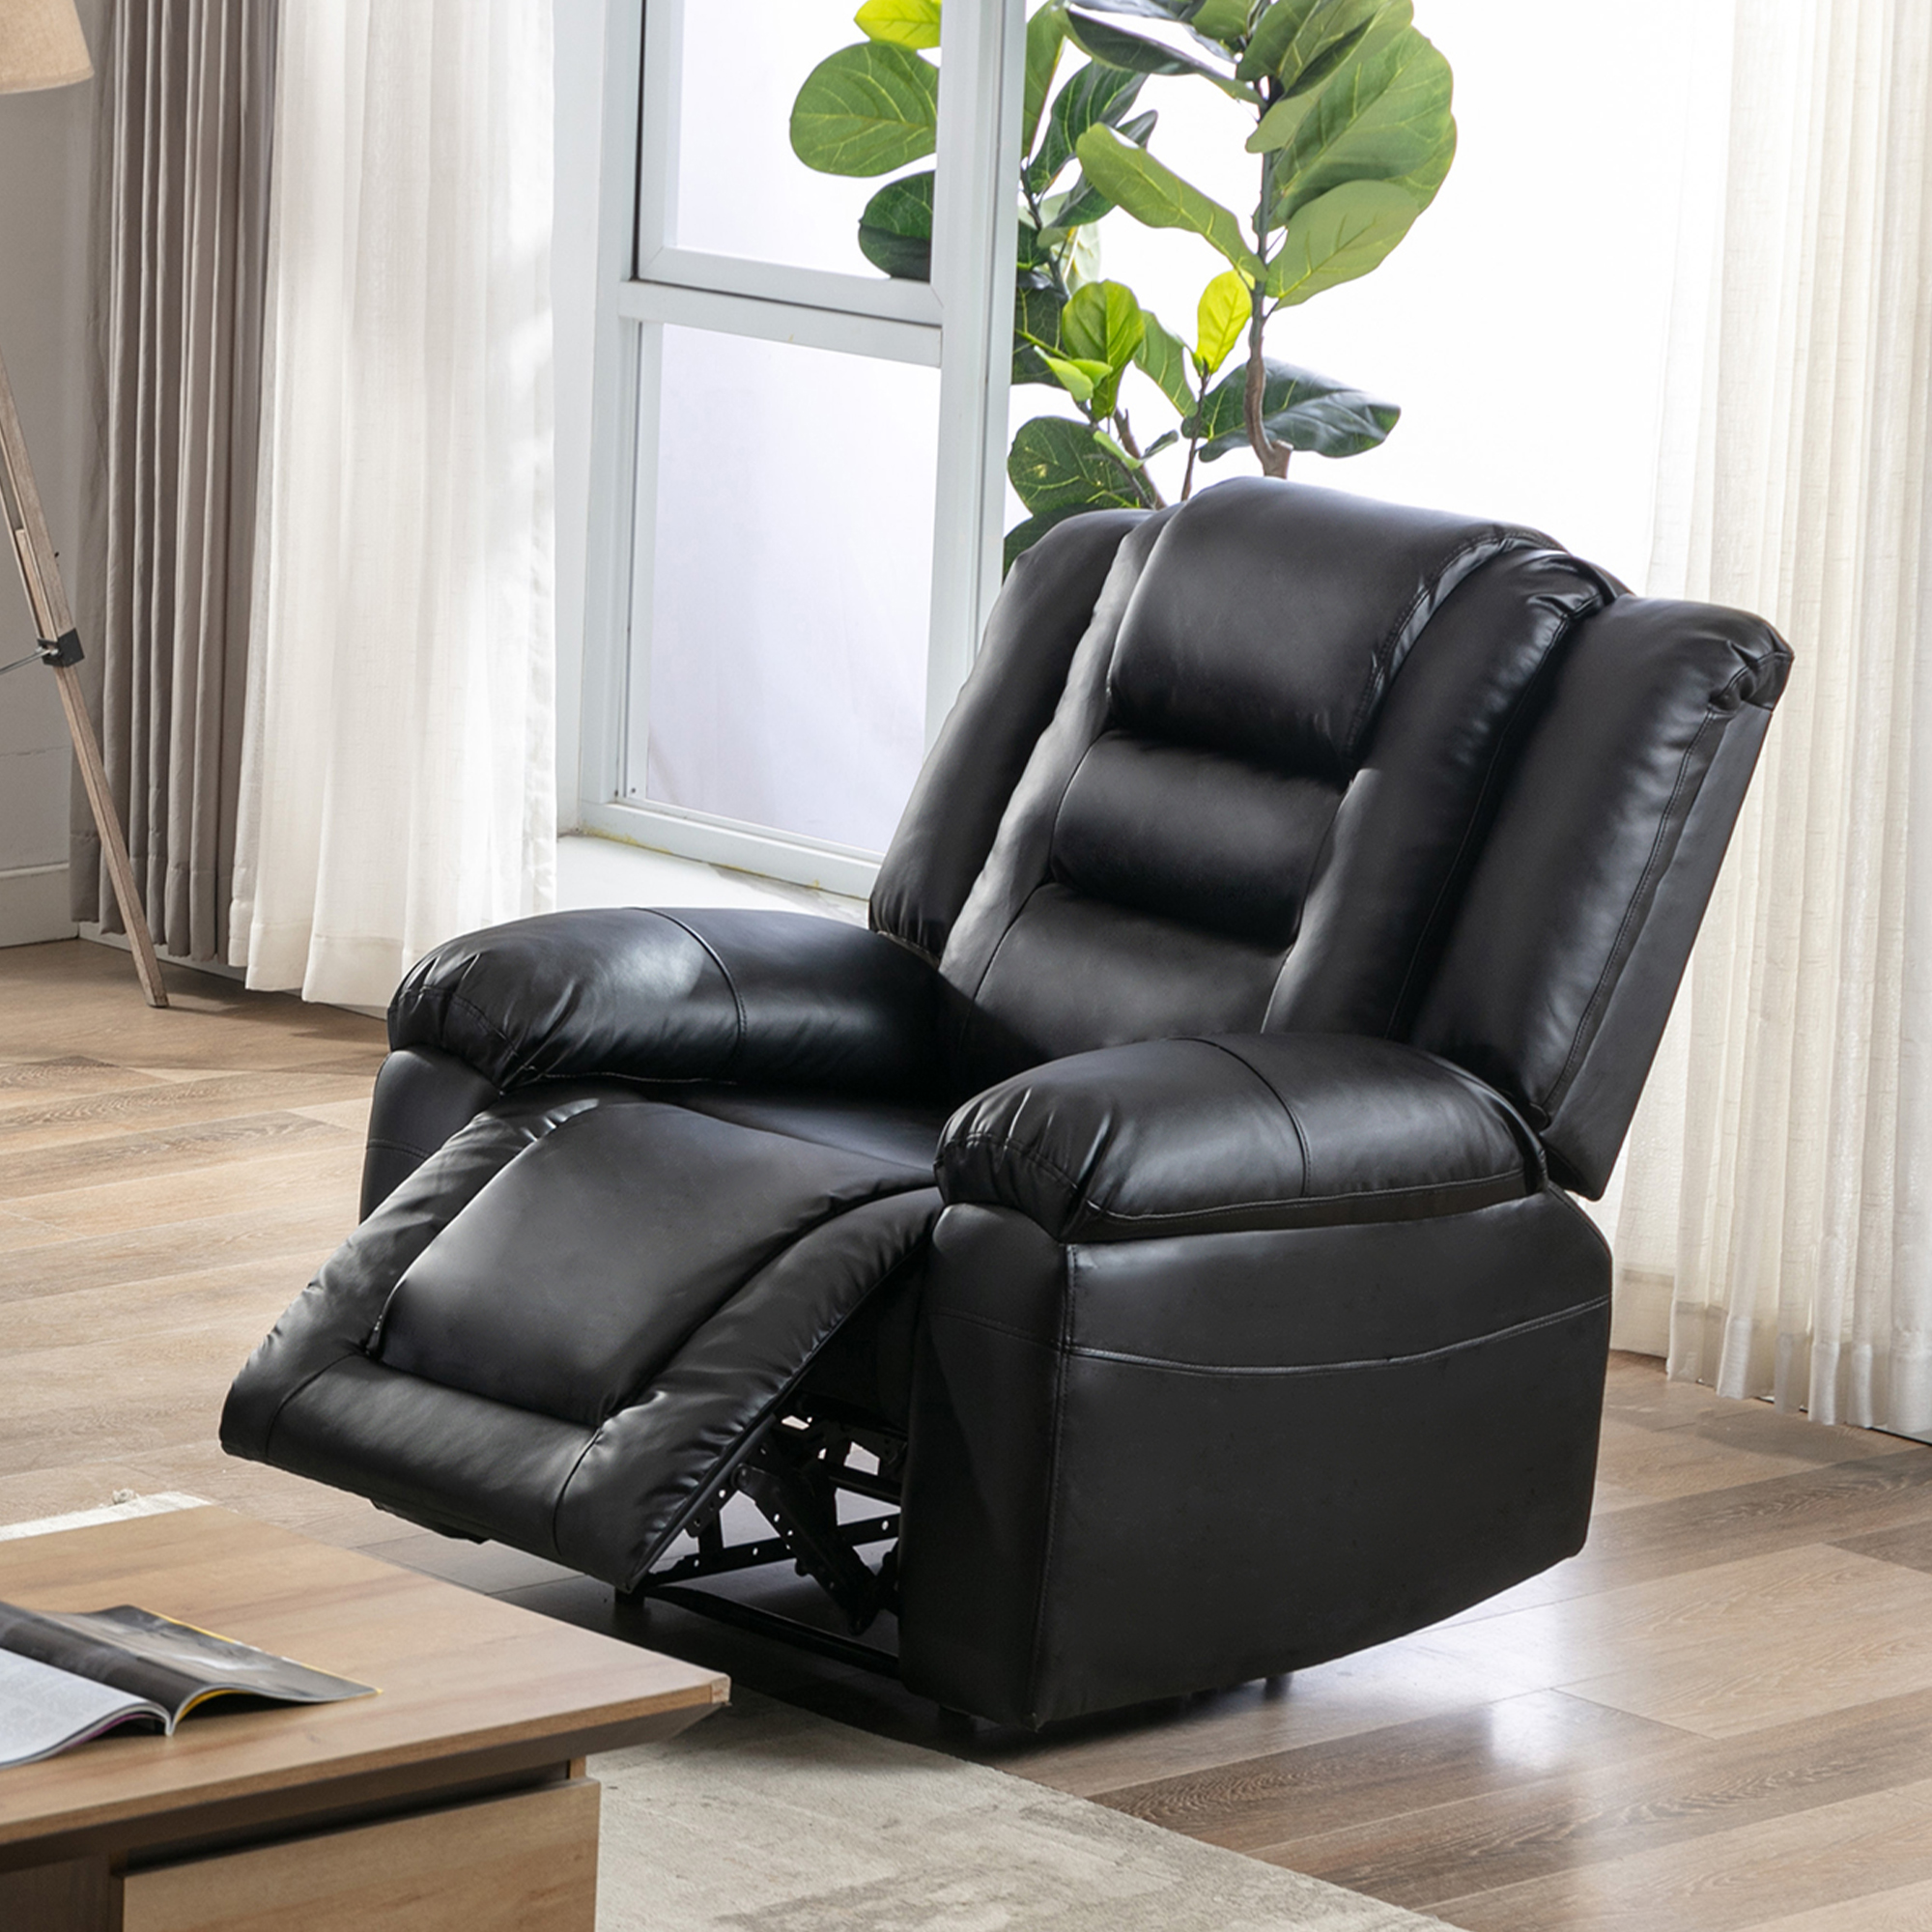 Orisfur. Home Theater Seating Manual Recliner, PU Leather Reclining Chair for Living Room (Recliner chair）-Boyel Living